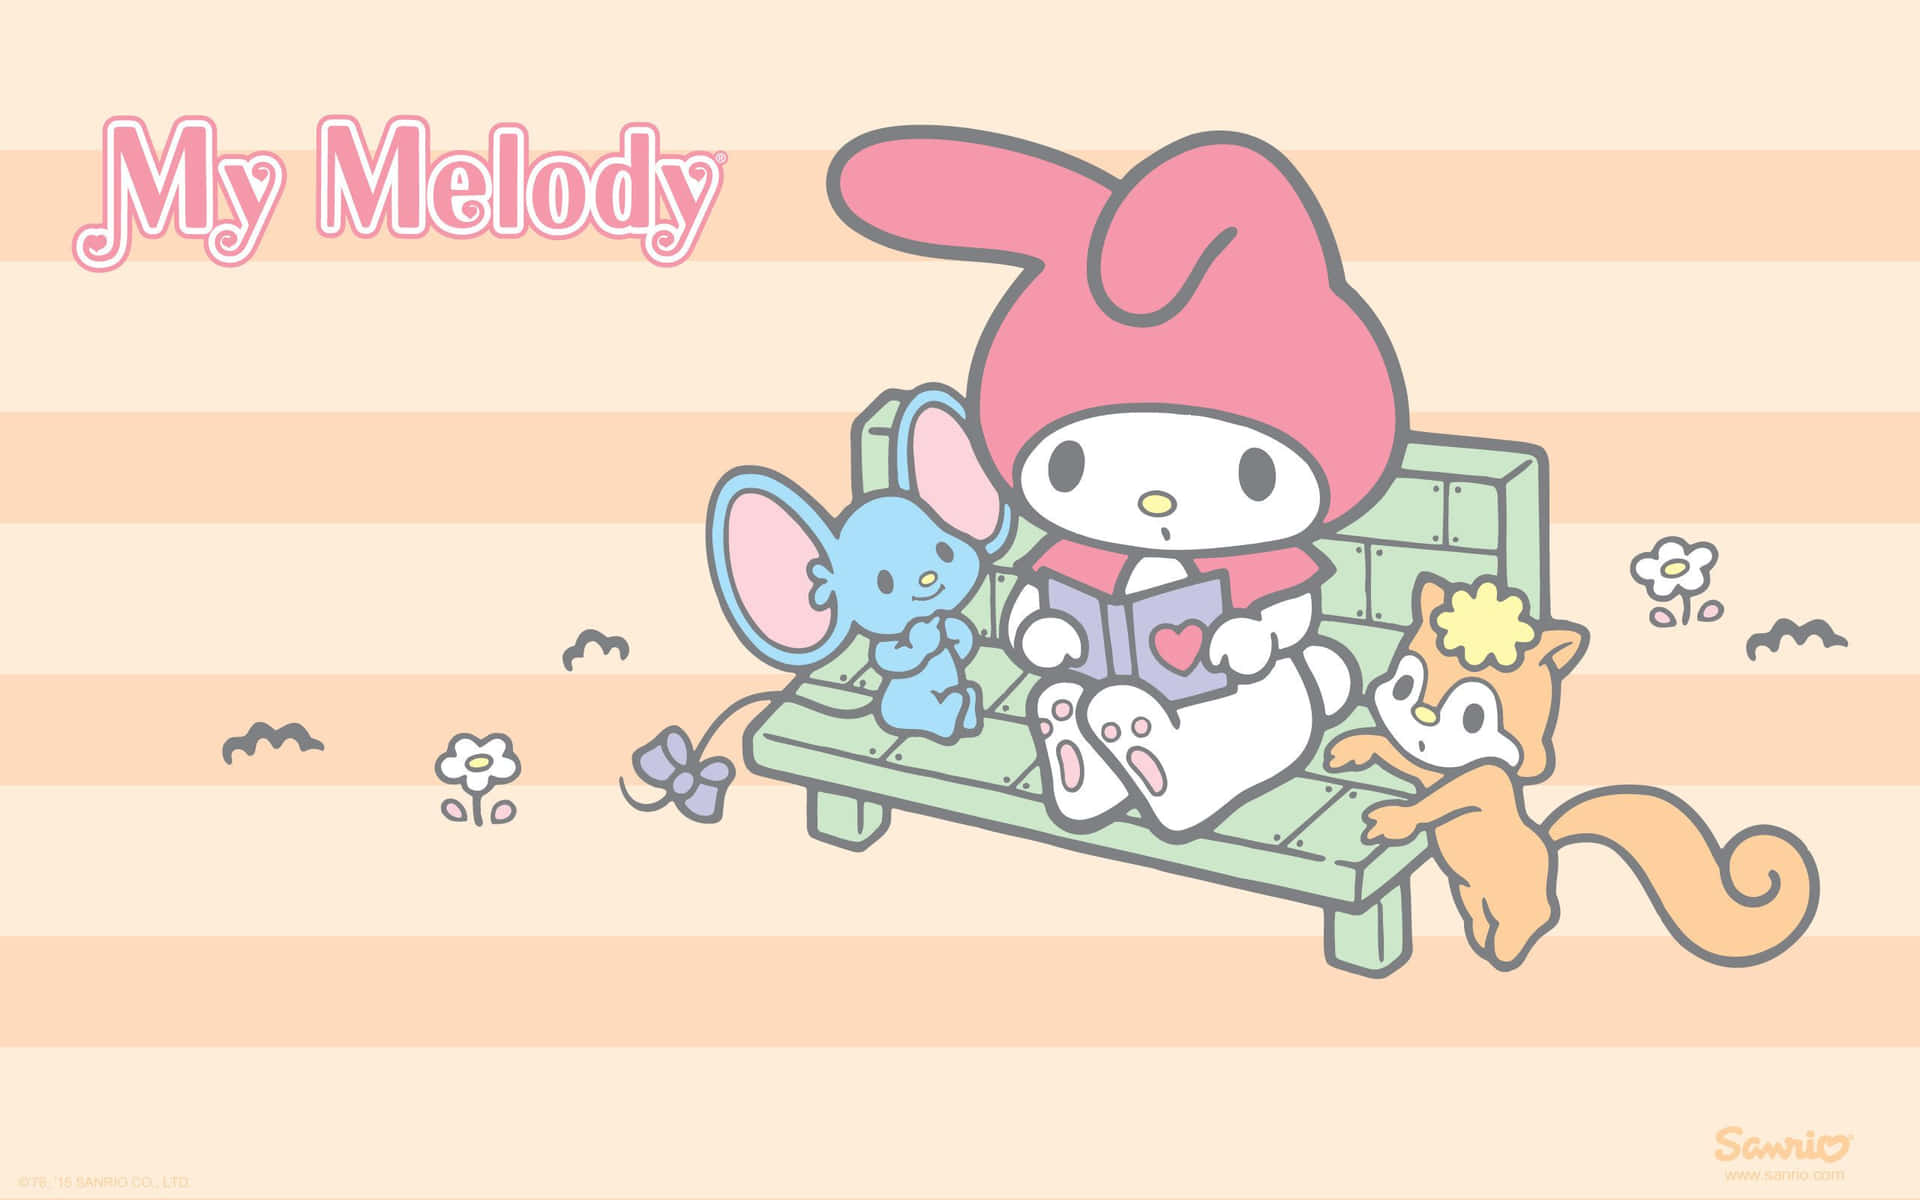 Get your work done quickly and stylishly with the My Melody Laptop Wallpaper